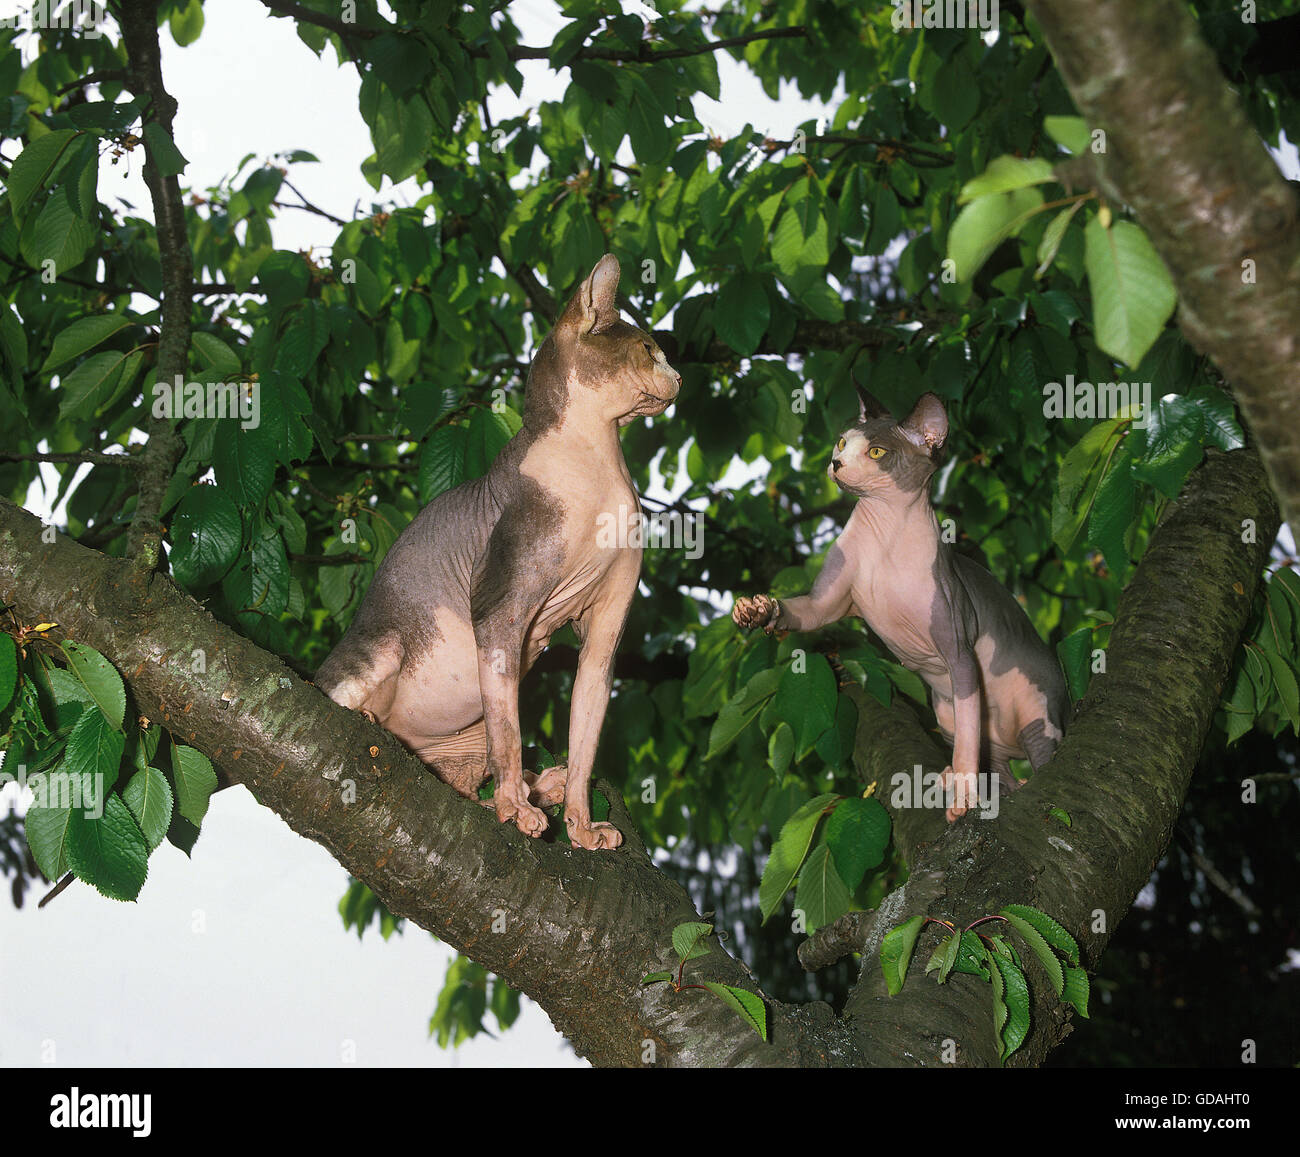 SPHYNX DOMESTIC CAT, ADULTS IN TREE Stock Photo